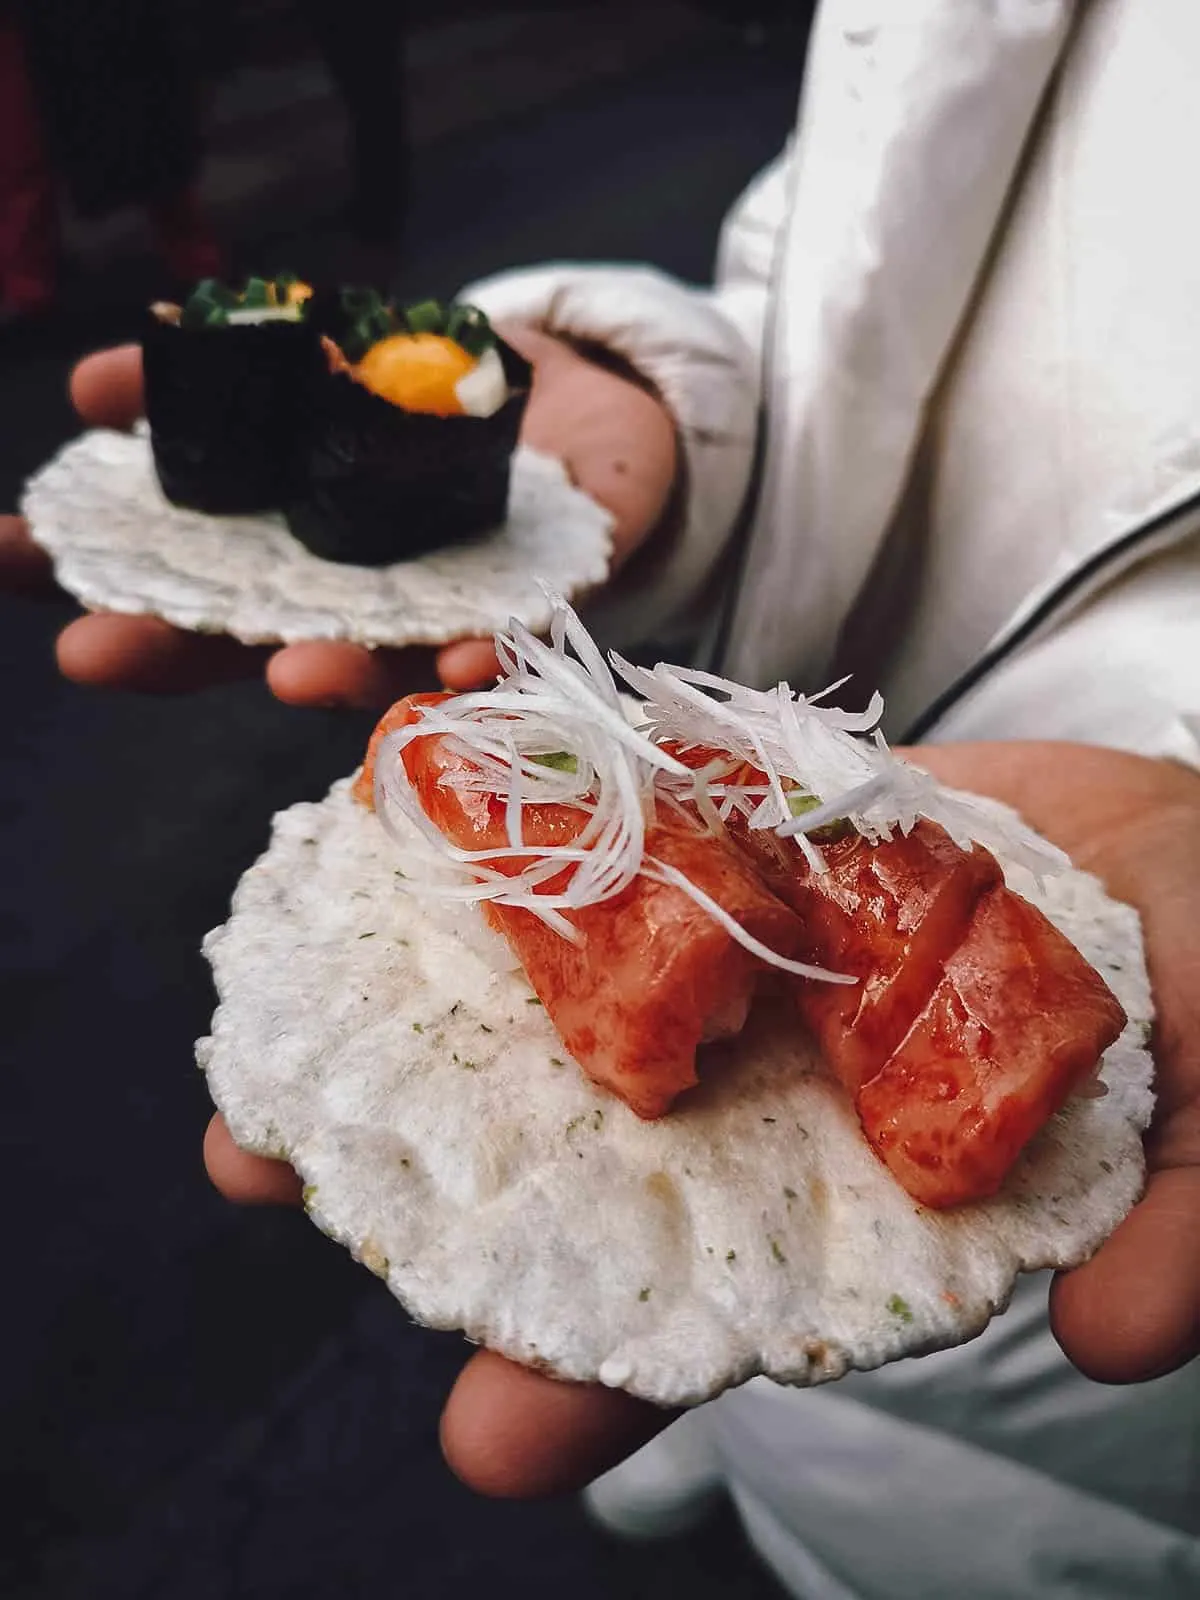 Hida beef sushi, a type of sushi made from raw sliced beef served with rice